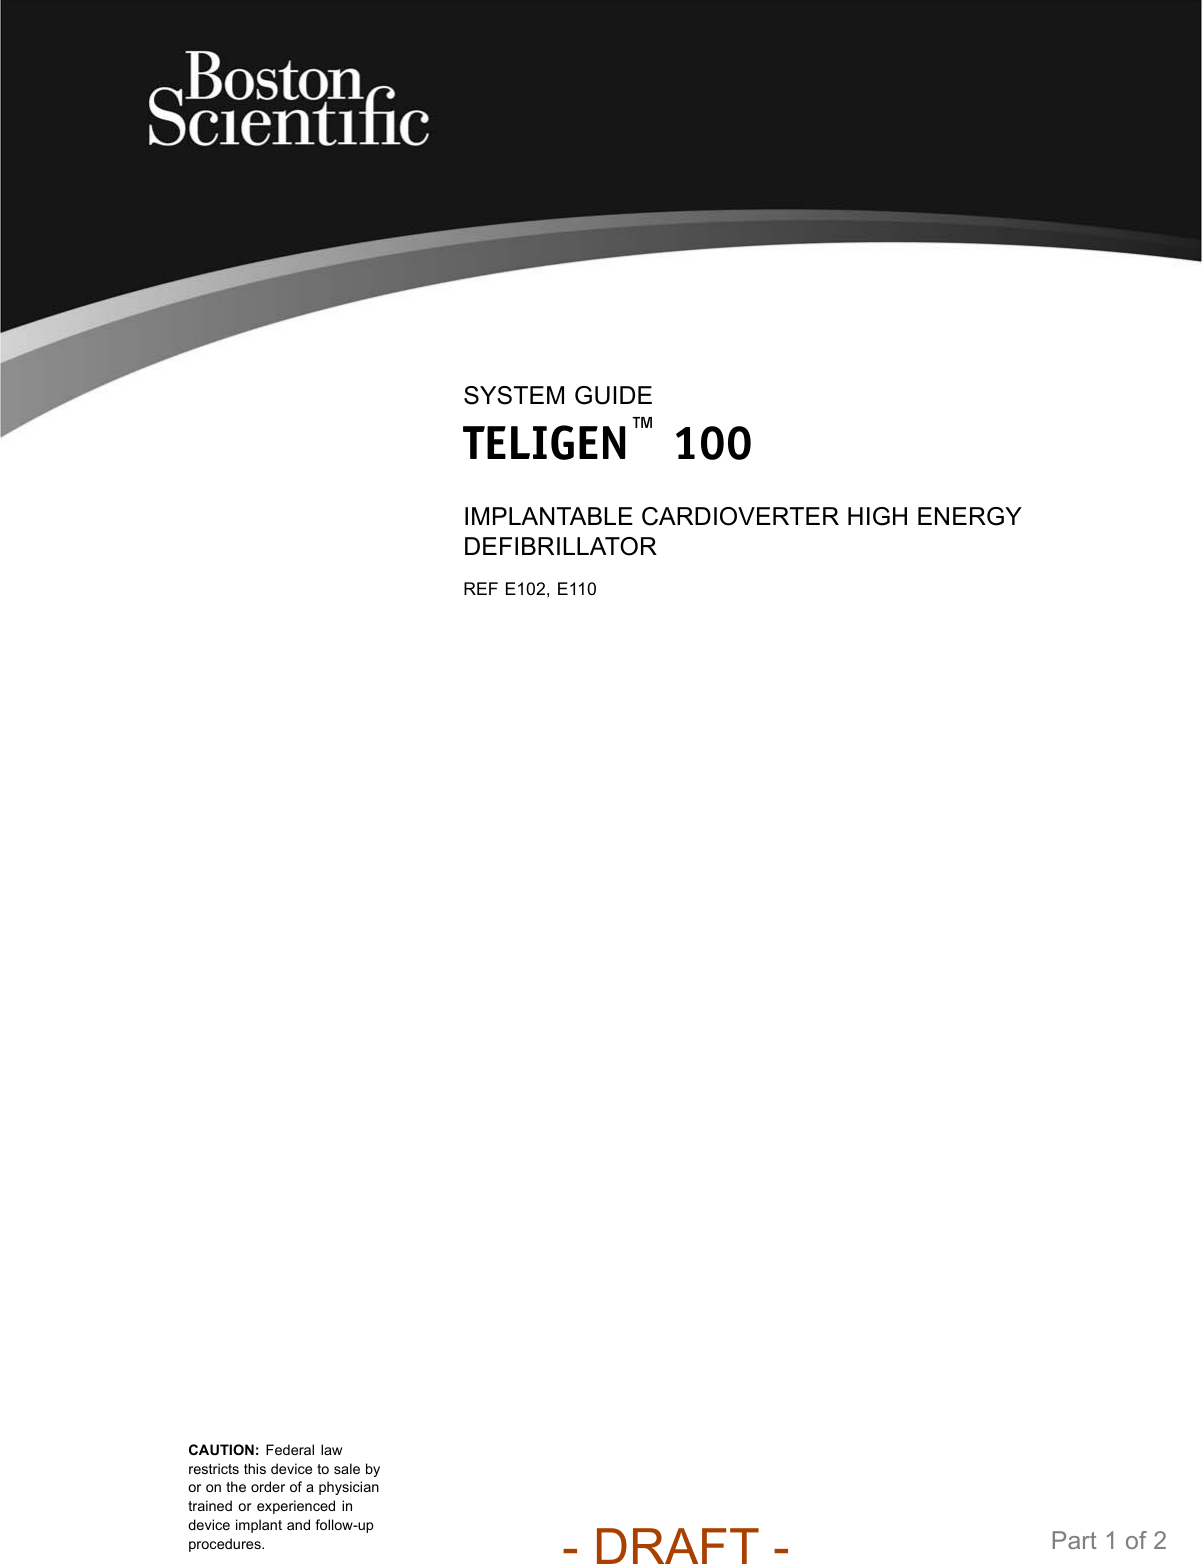 SYSTEM GUIDETELIGEN™100IMPLANTABLE CARDIOVERTER HIGH ENERGYDEFIBRILLATORREF E102, E110CAUTION: Federal lawrestricts this device to sale byor on the order of a physiciantrained or experienced indevice implant and follow-upprocedures. Part 1 of 2- DRAFT -